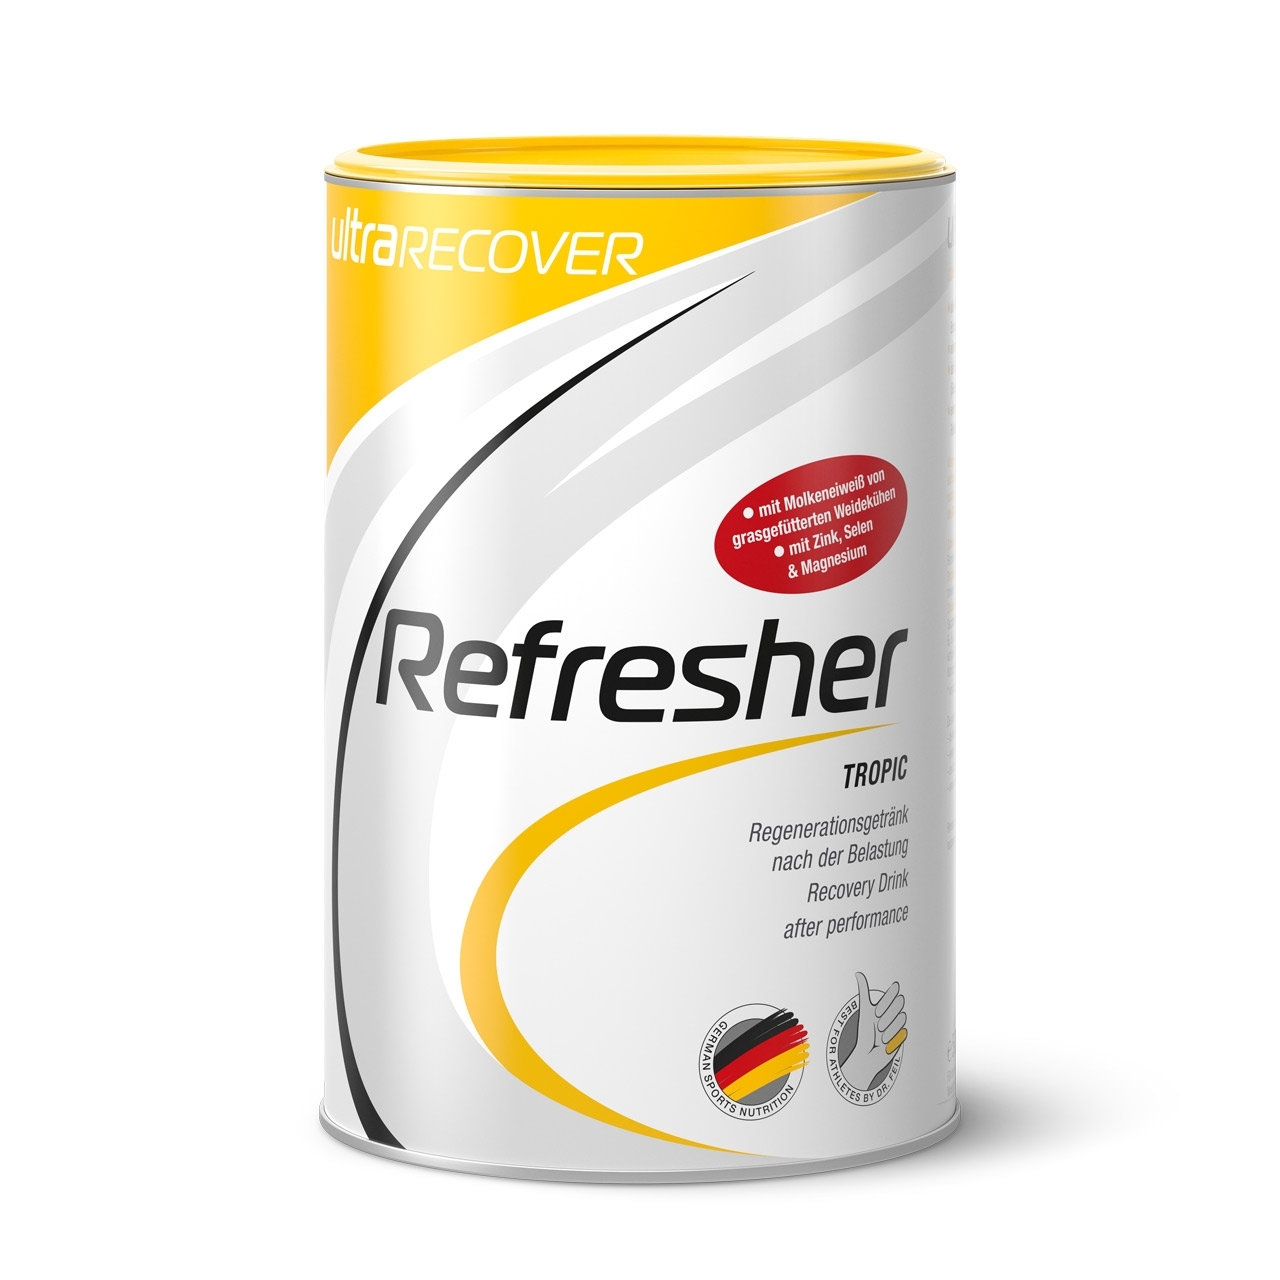 ultraRecover Refresher 500g